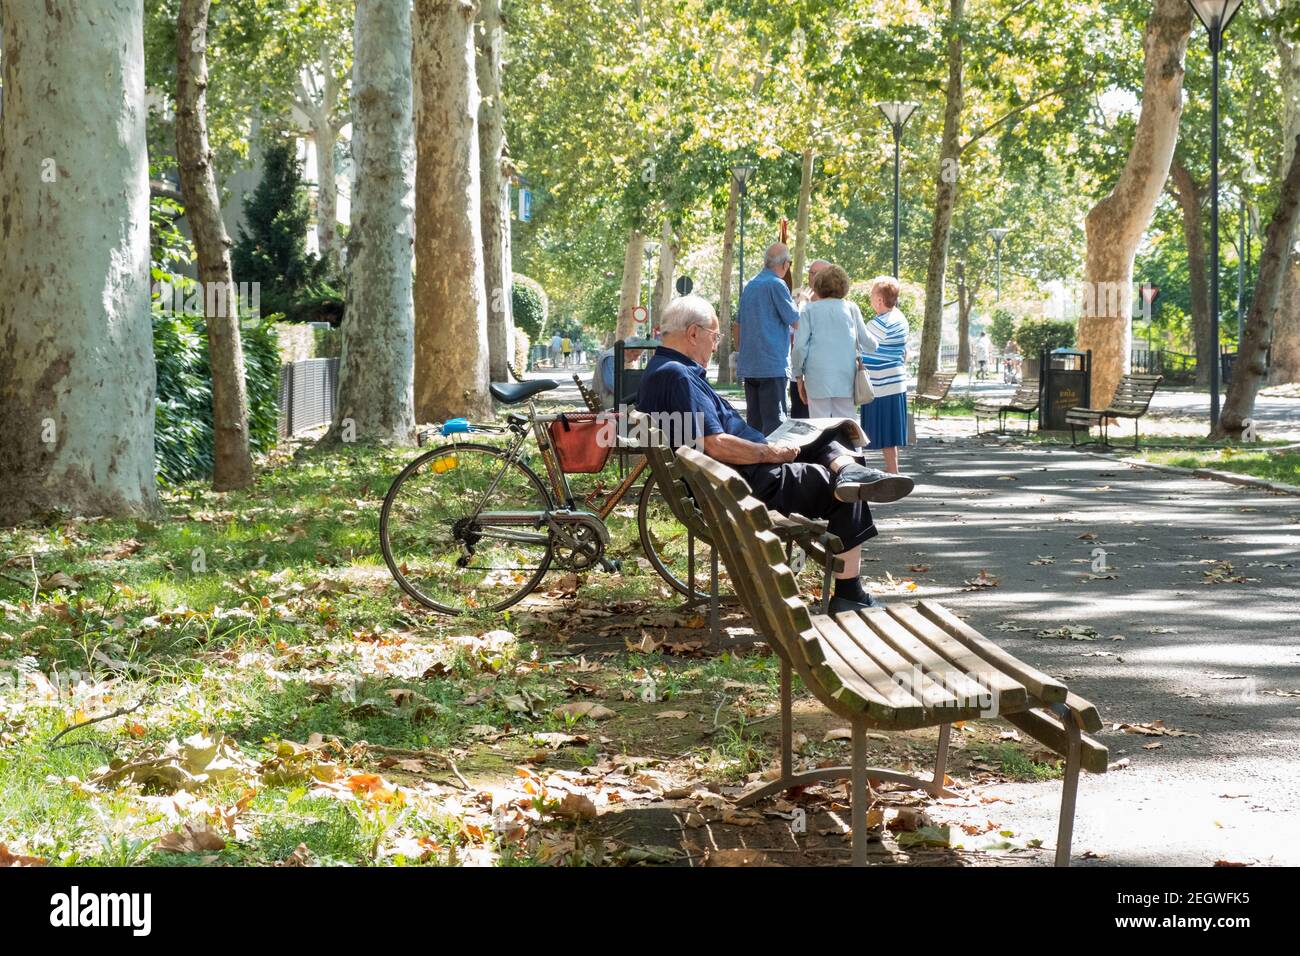 People meeting and relaxing on a sunday morning in the park on a warm autumnal day, city of Piacenza, Italy Stock Photo